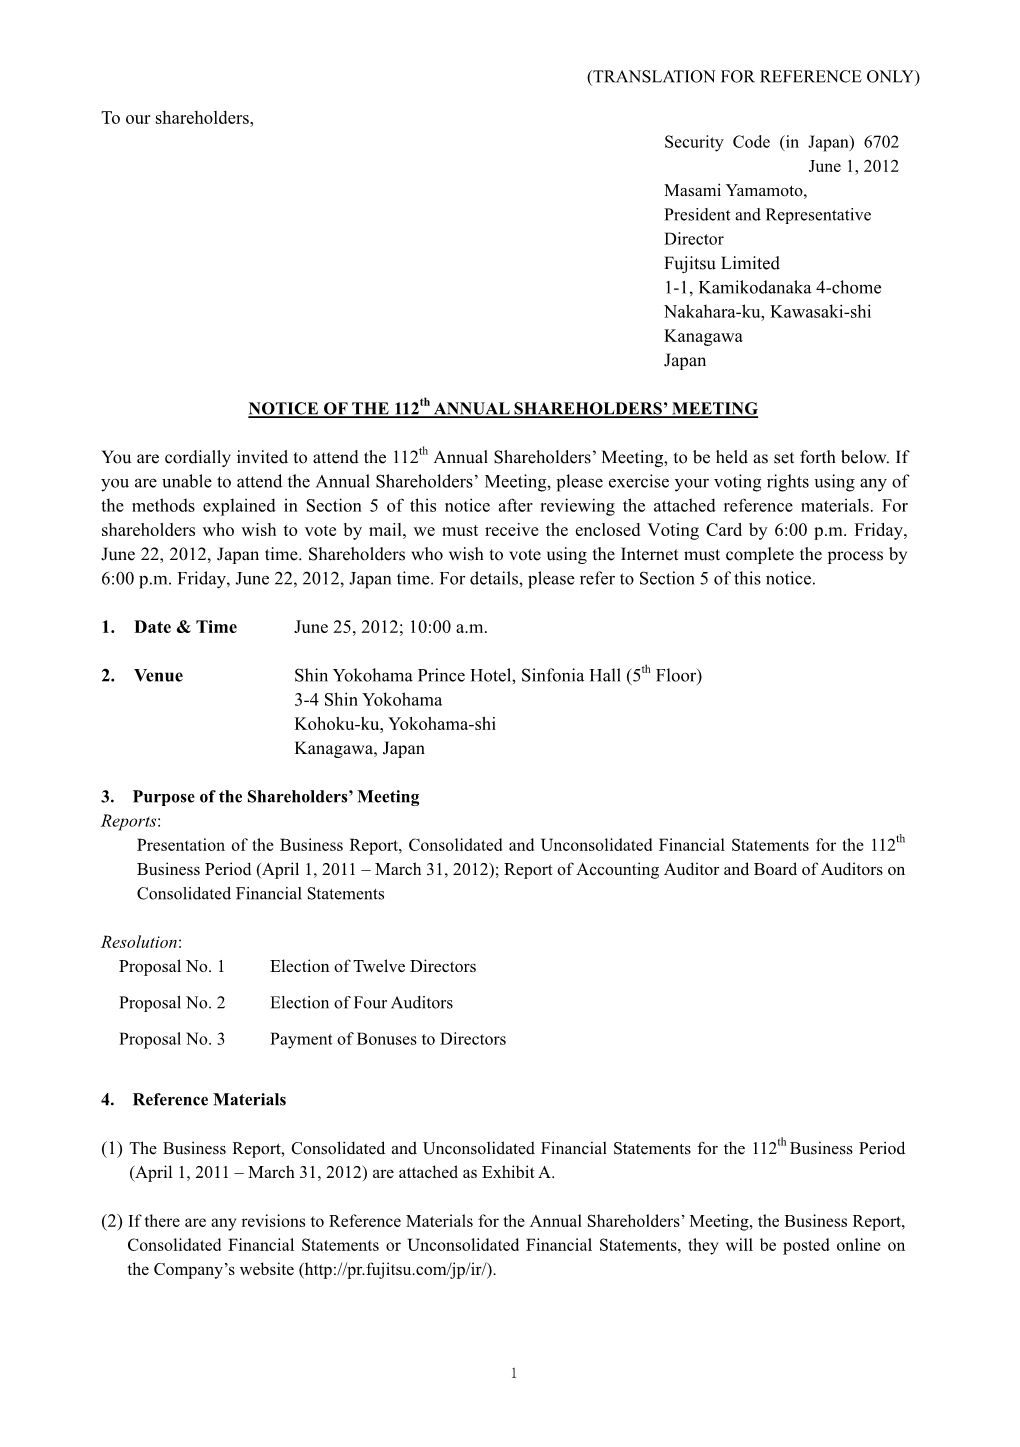 NOTICE of the 112Th ANNUAL SHAREHOLDERS' MEETING